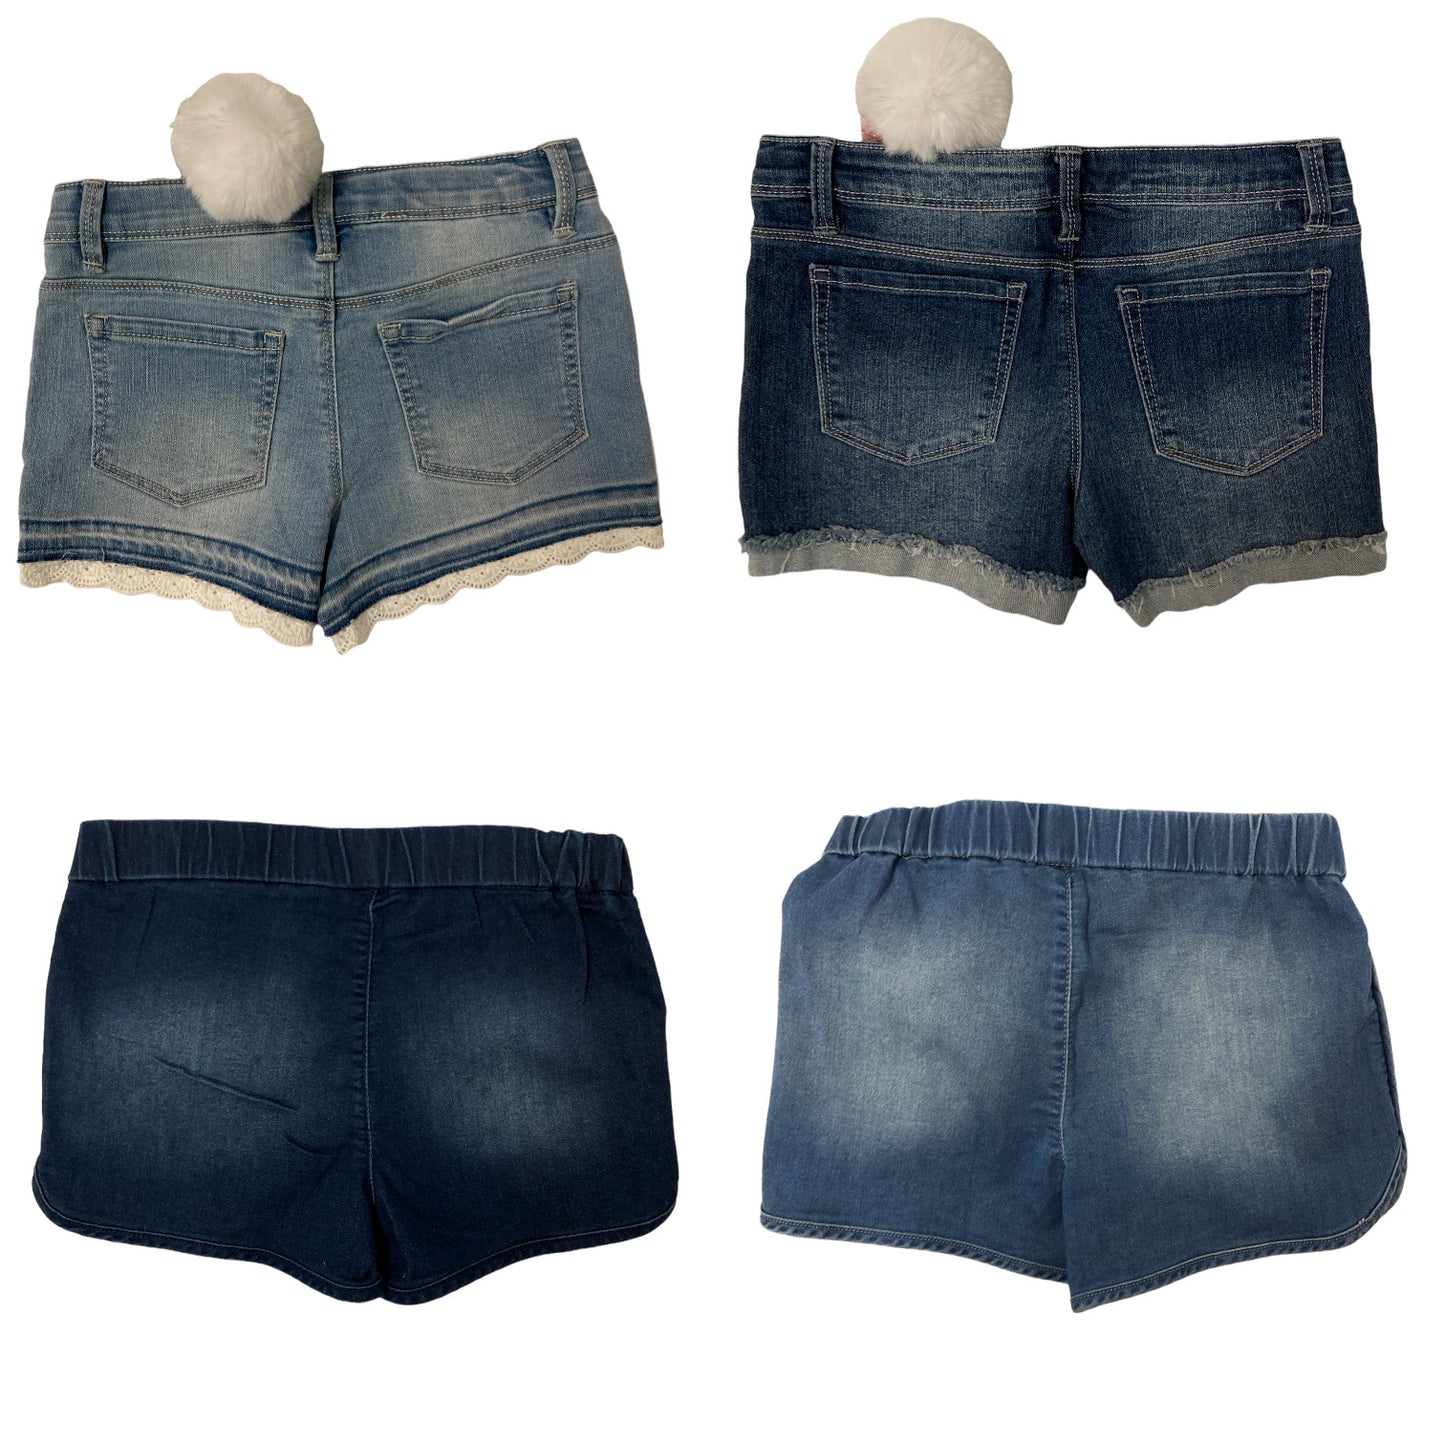 Member's Mark Girl's Denim Short With Removable Accessory